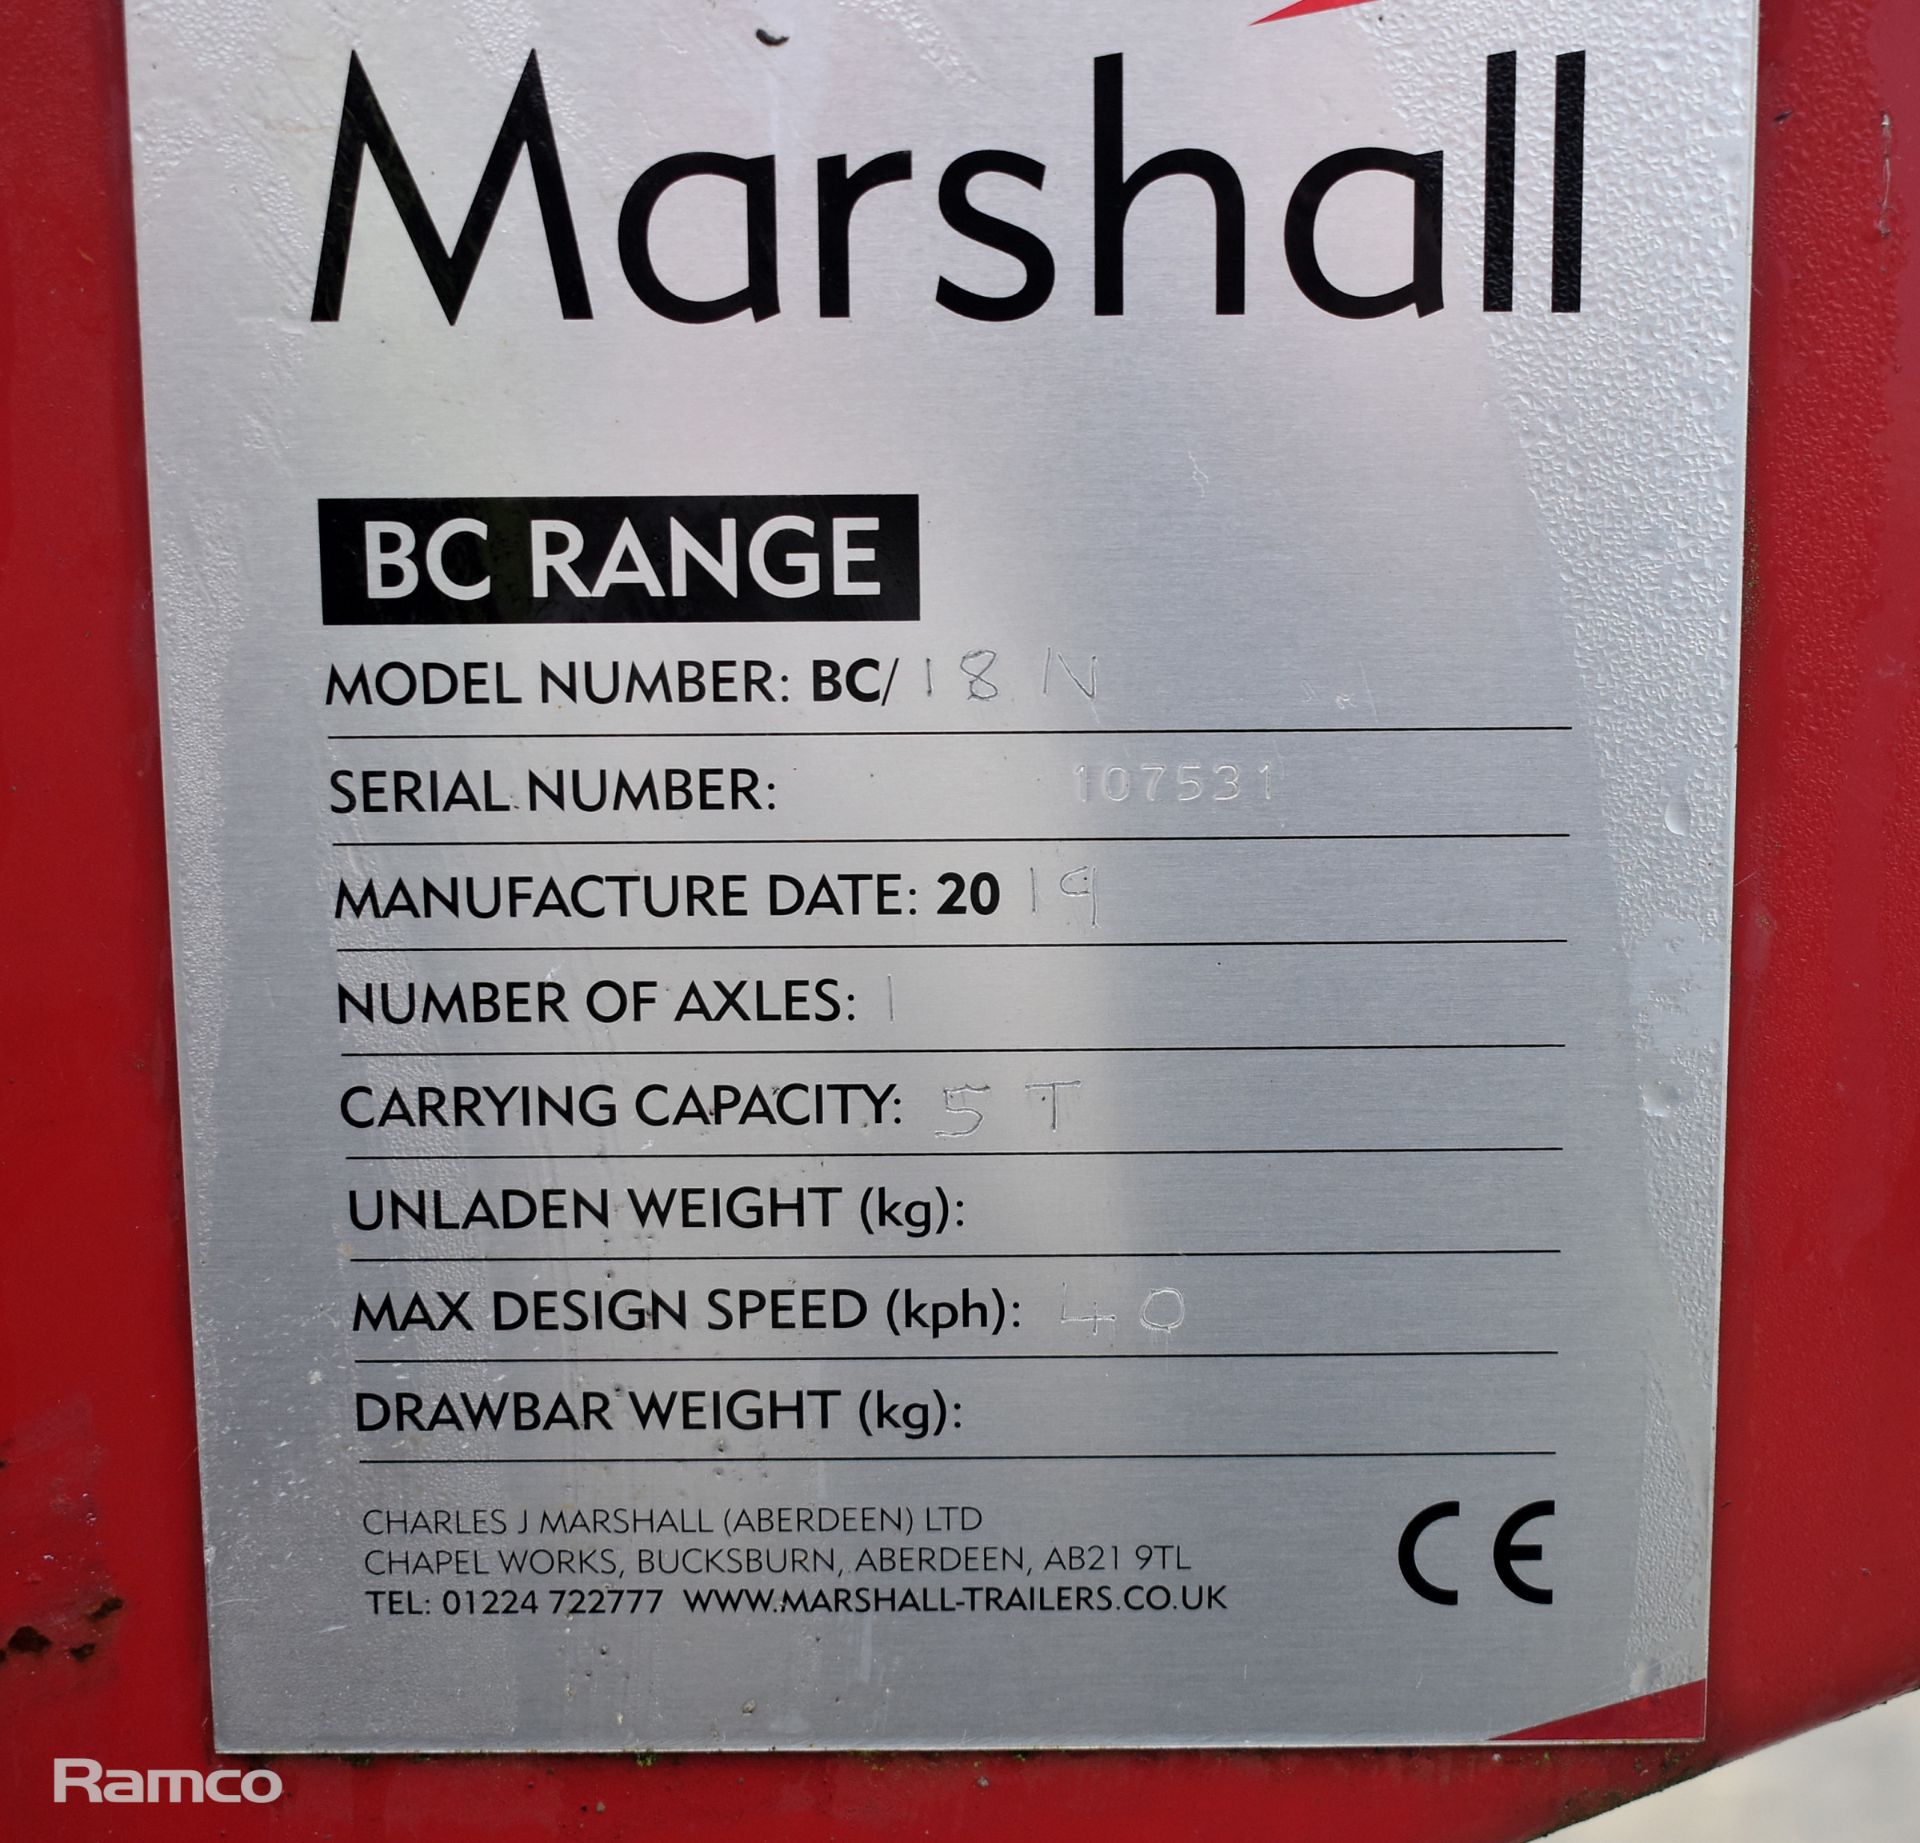 Marshall BC18N 2019 single axle flatbed trailer - 5000kg carrying capacity - serial number 107531 - Image 8 of 12